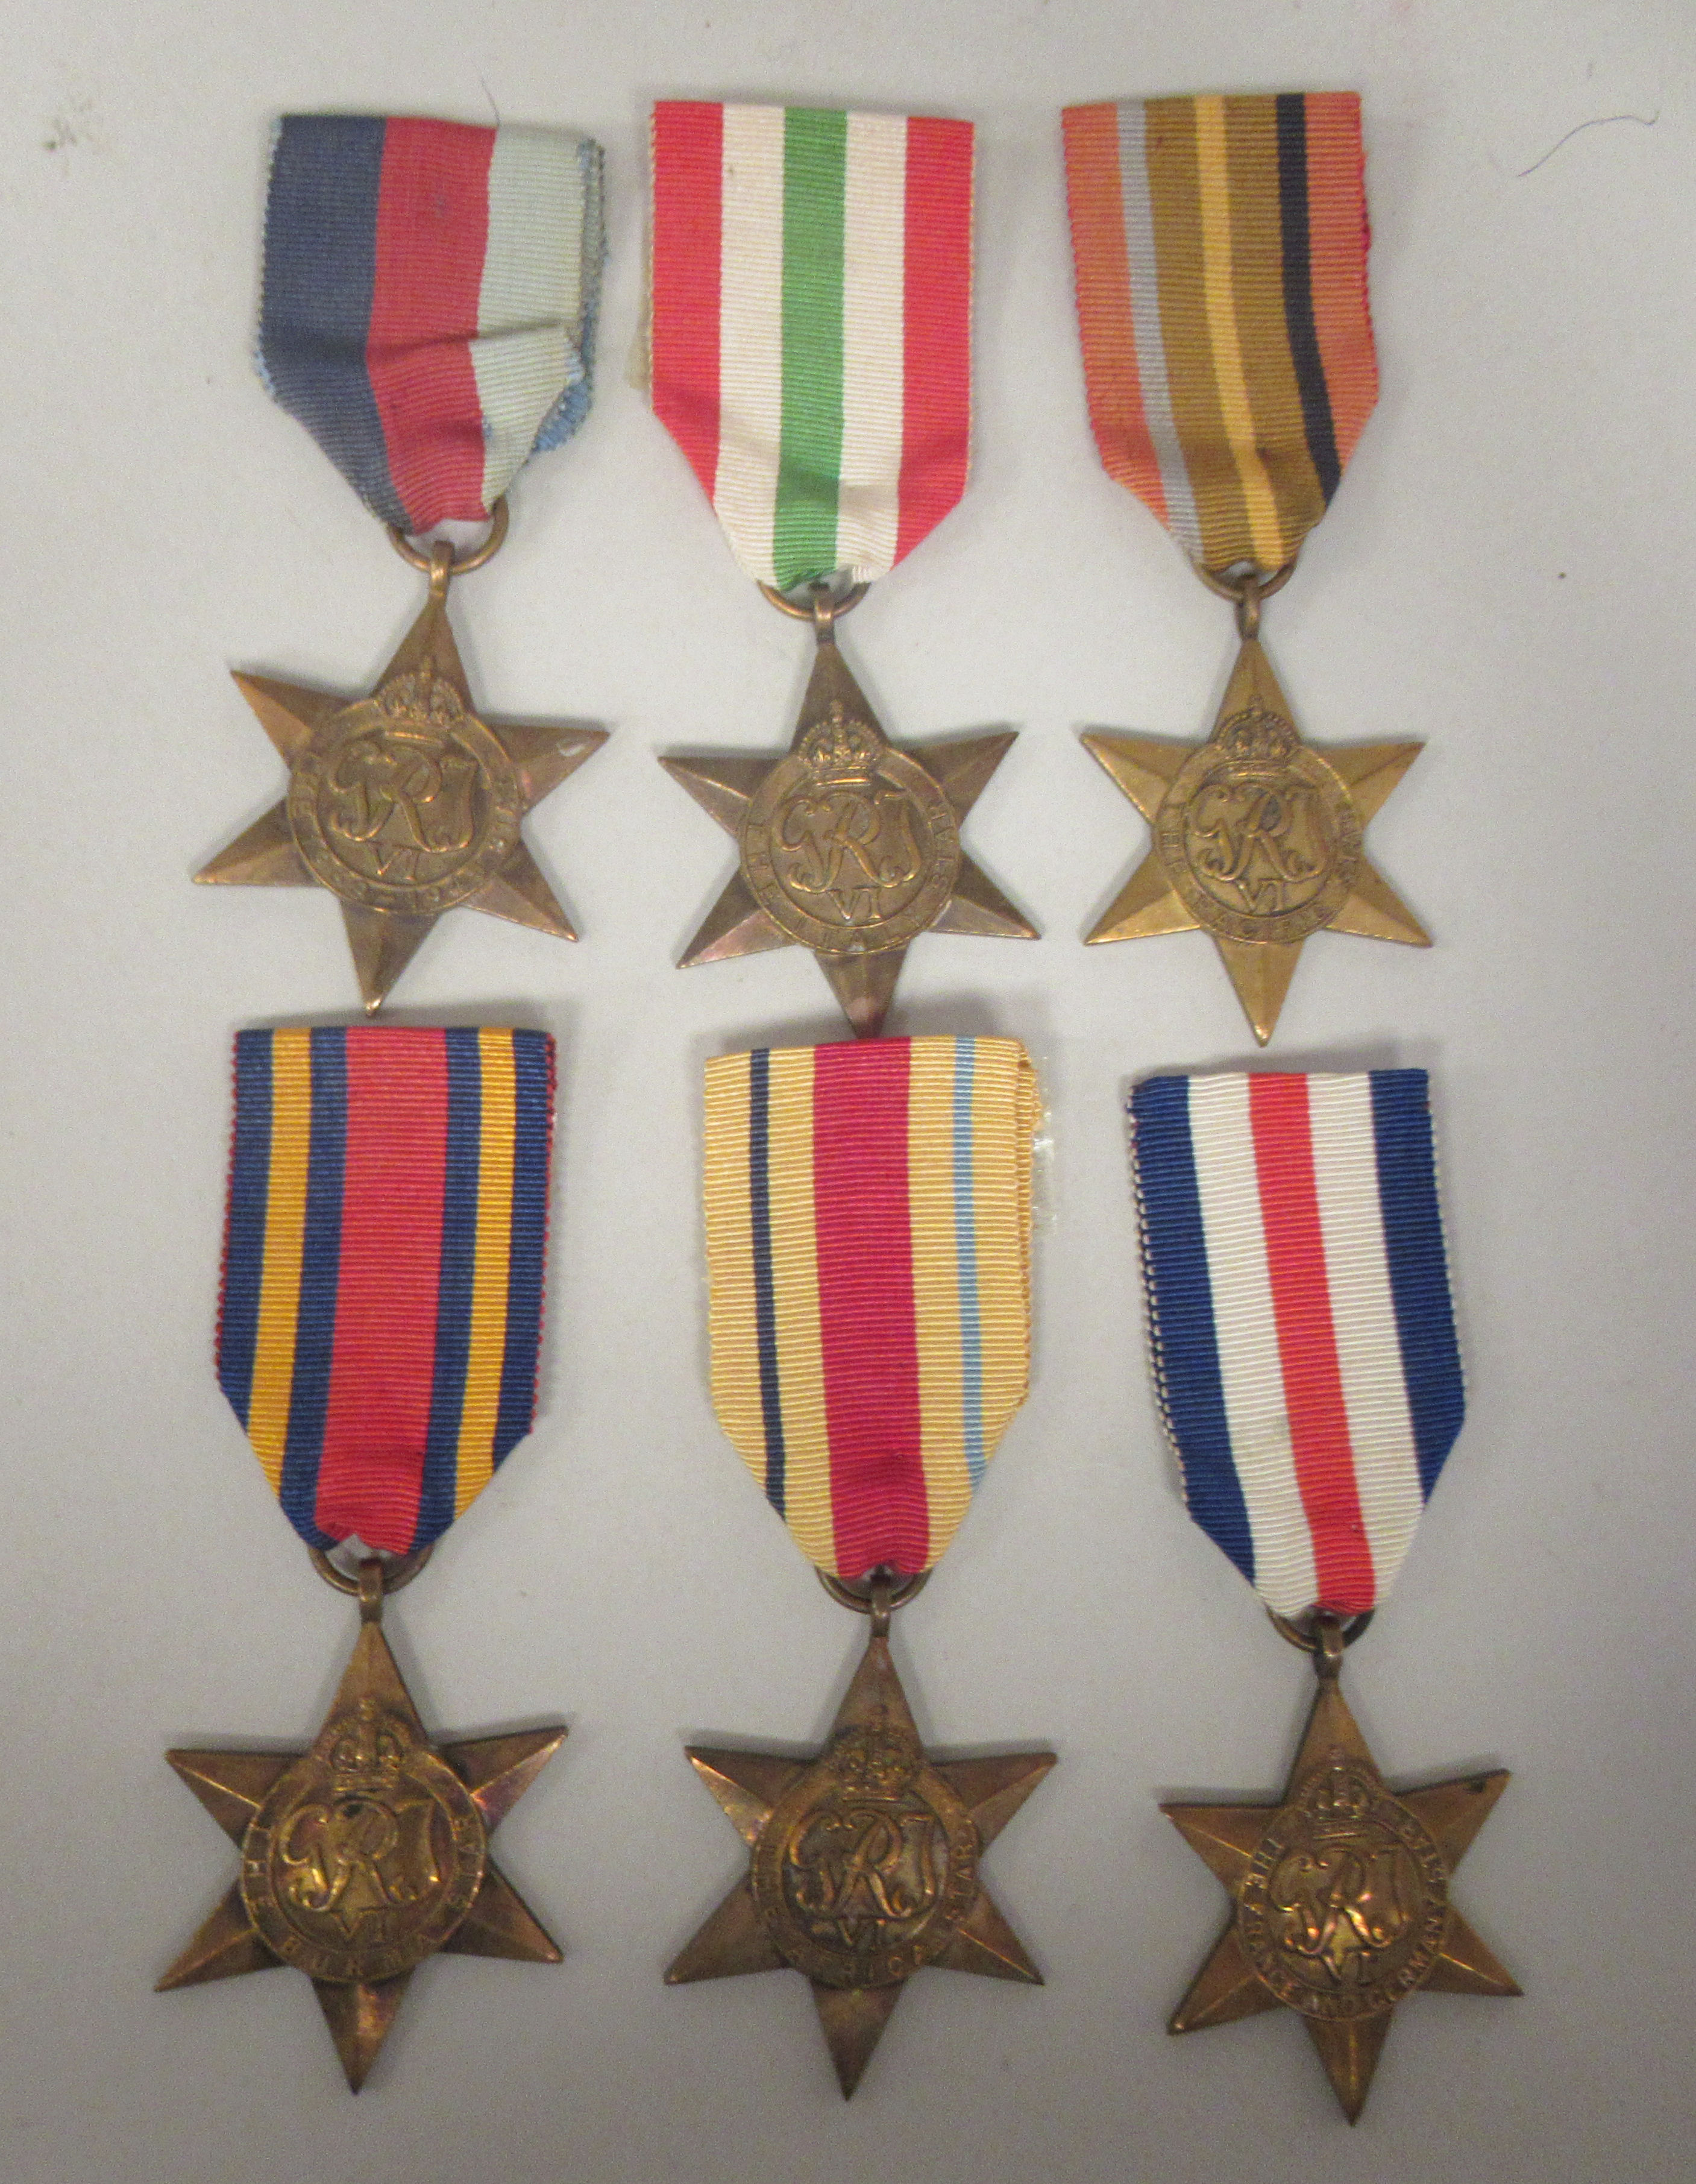 Six Second World War Stars on ribbons for The Pacific, Burma, France and Germany 1939-1945, Africa